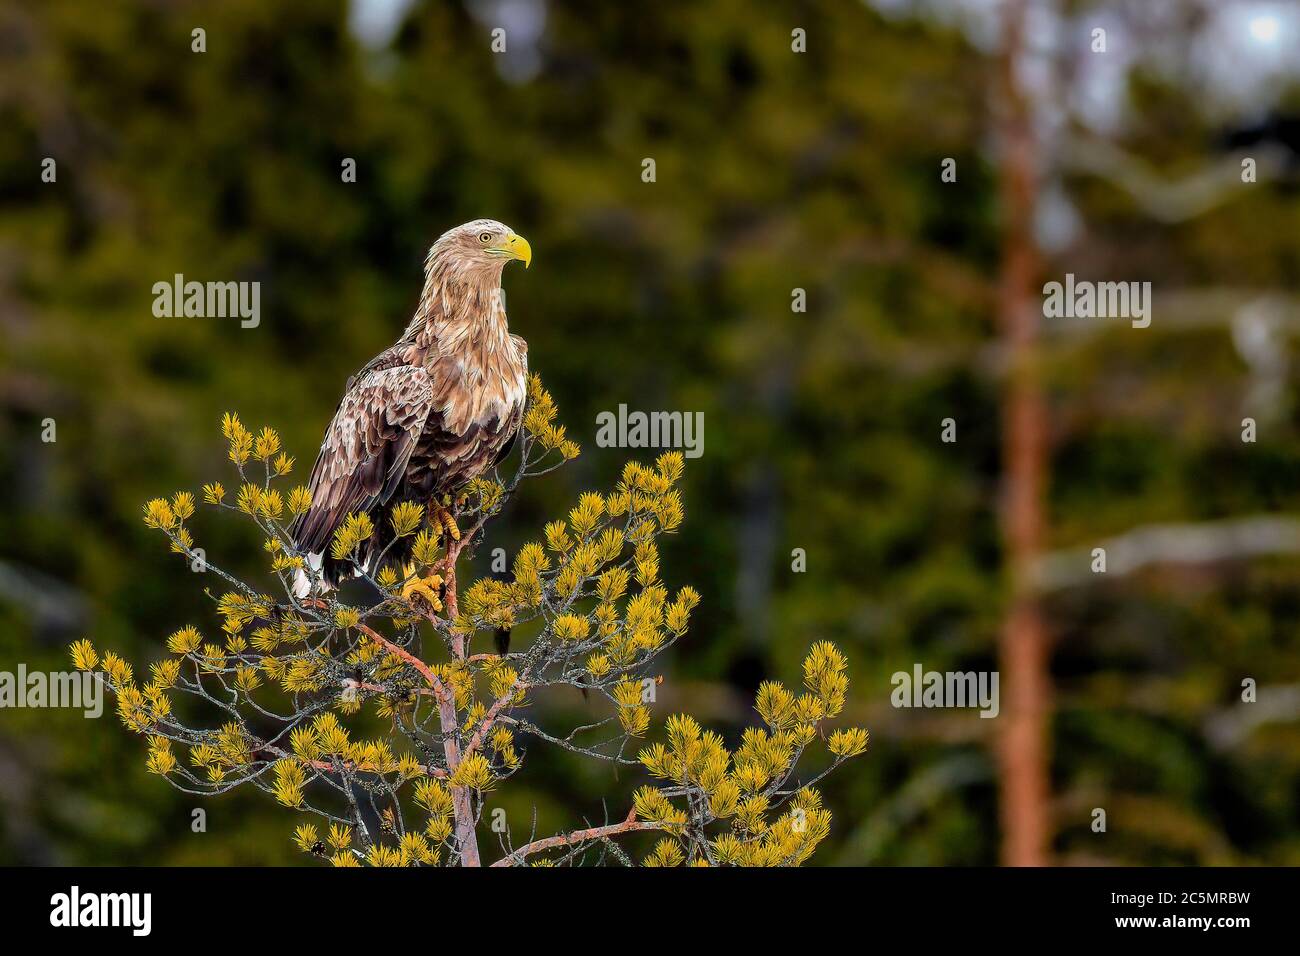 White-tailed eagle at the top of a pine tree Stock Photo